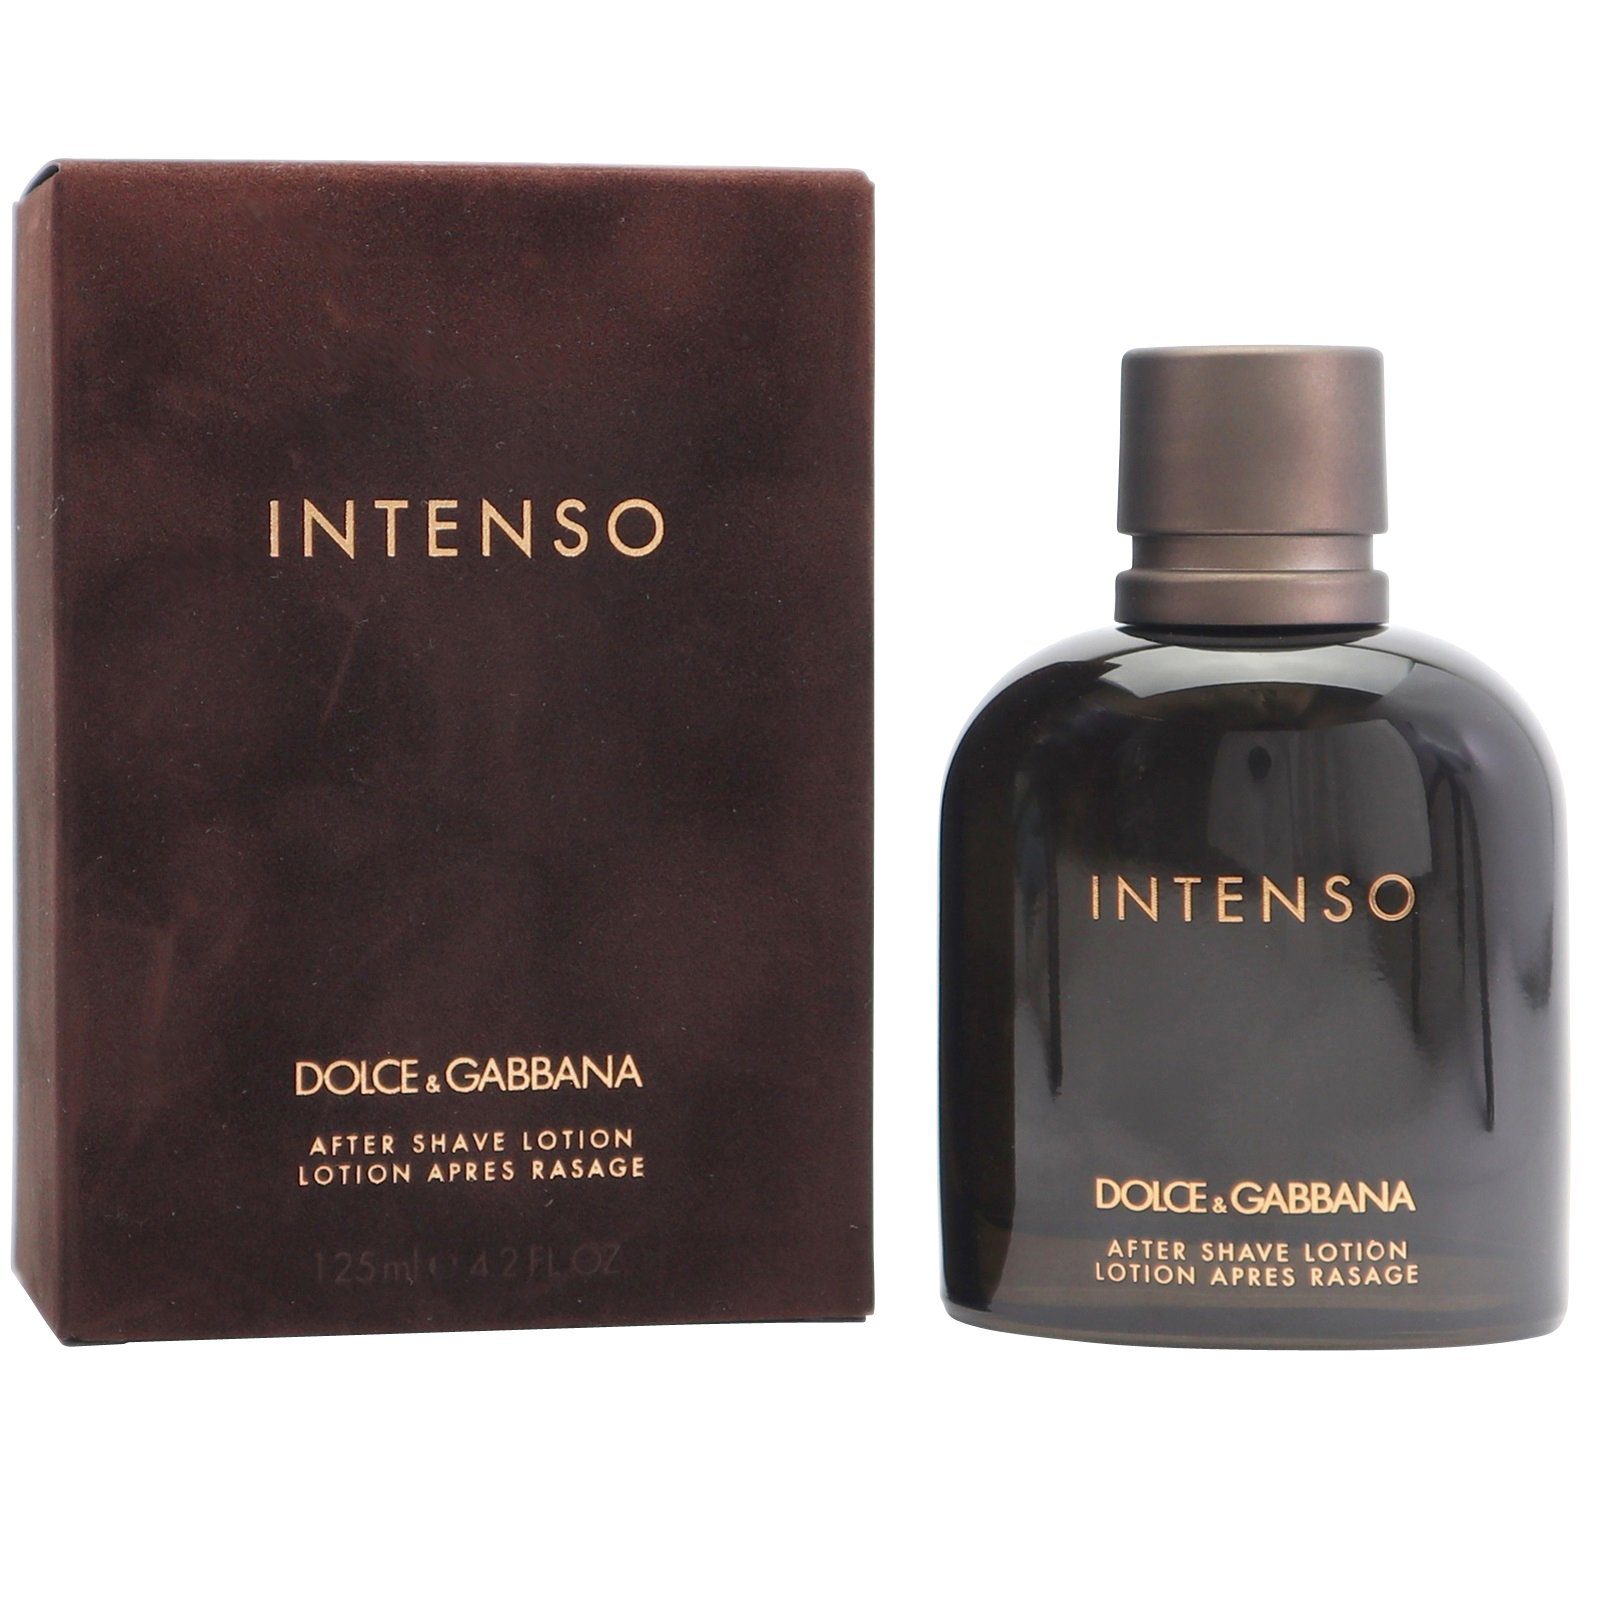 DOLCE & GABBANA After Shave Lotion Dolce & Gabbana Intenso D&G After Shave Lotion 125 ml